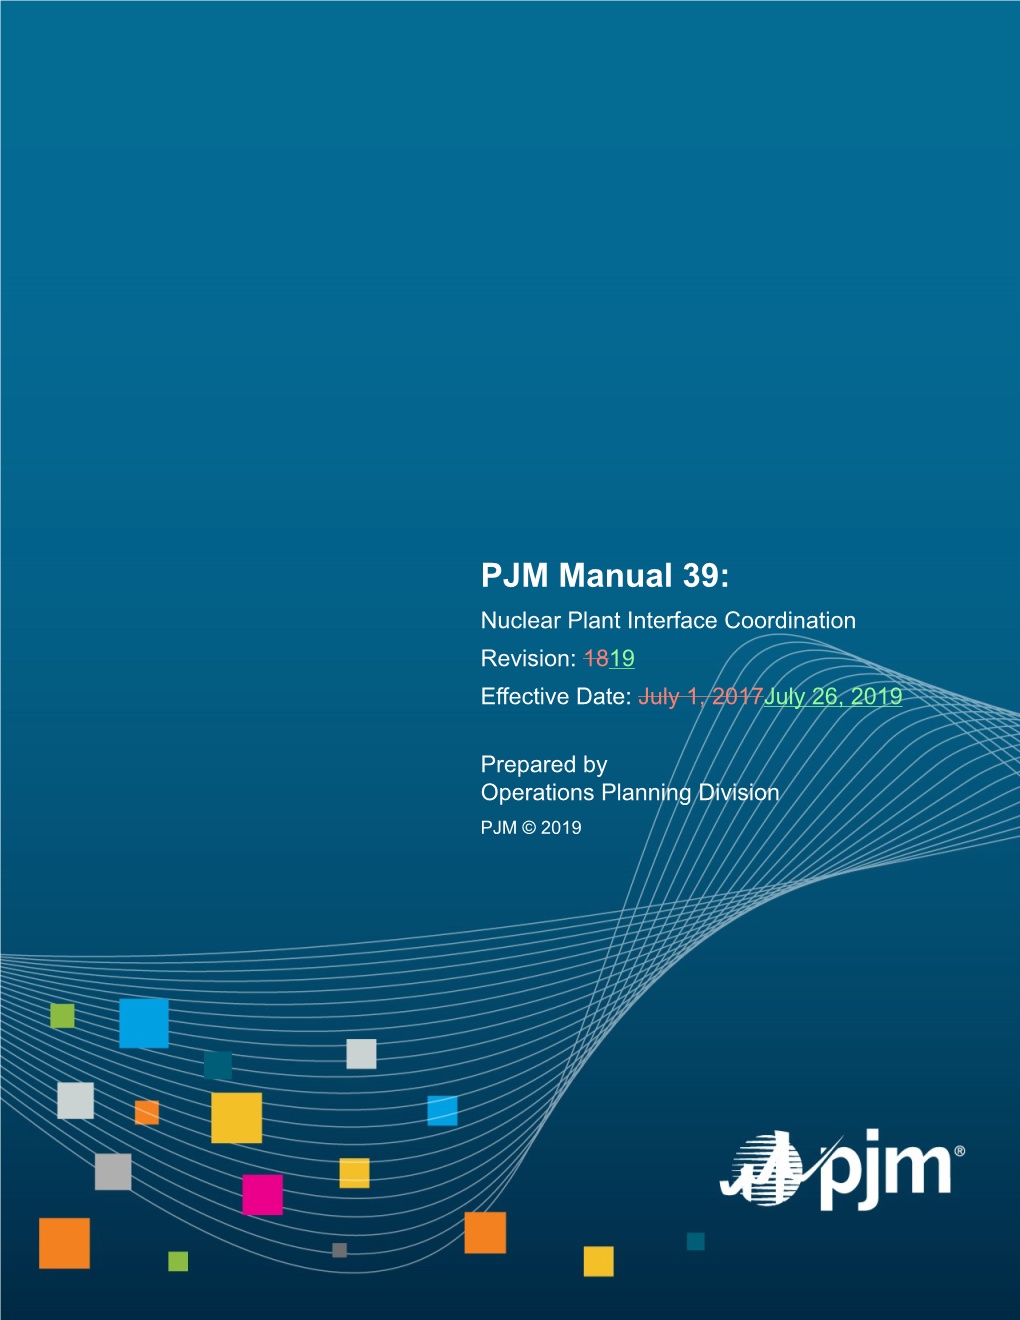 PJM Manual 39: Nuclear Plant Interface Coordination Revision: 1819 Effective Date: July 1, 2017July 26, 2019